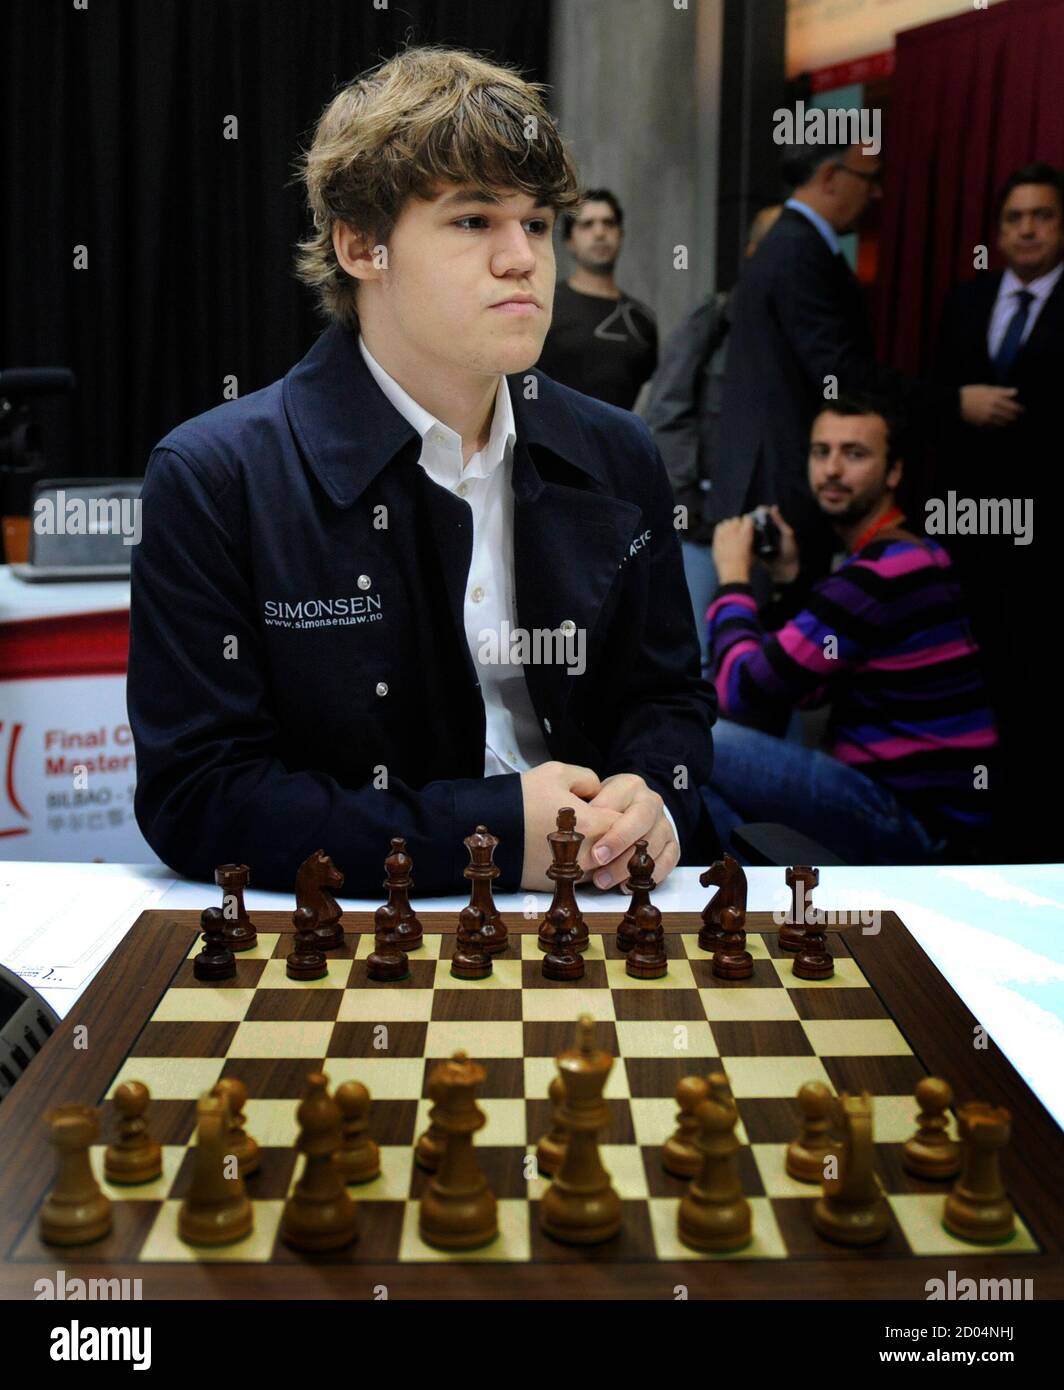 Norwegian chess player Magnus Carlsen prepares to play against India's Viswanathan Anand during the Bilbao Final Masters 2010 in Bilbao October 15, 2010. REUTERS/Vincent West (SPAIN - Tags: SOCIETY Photo - Alamy